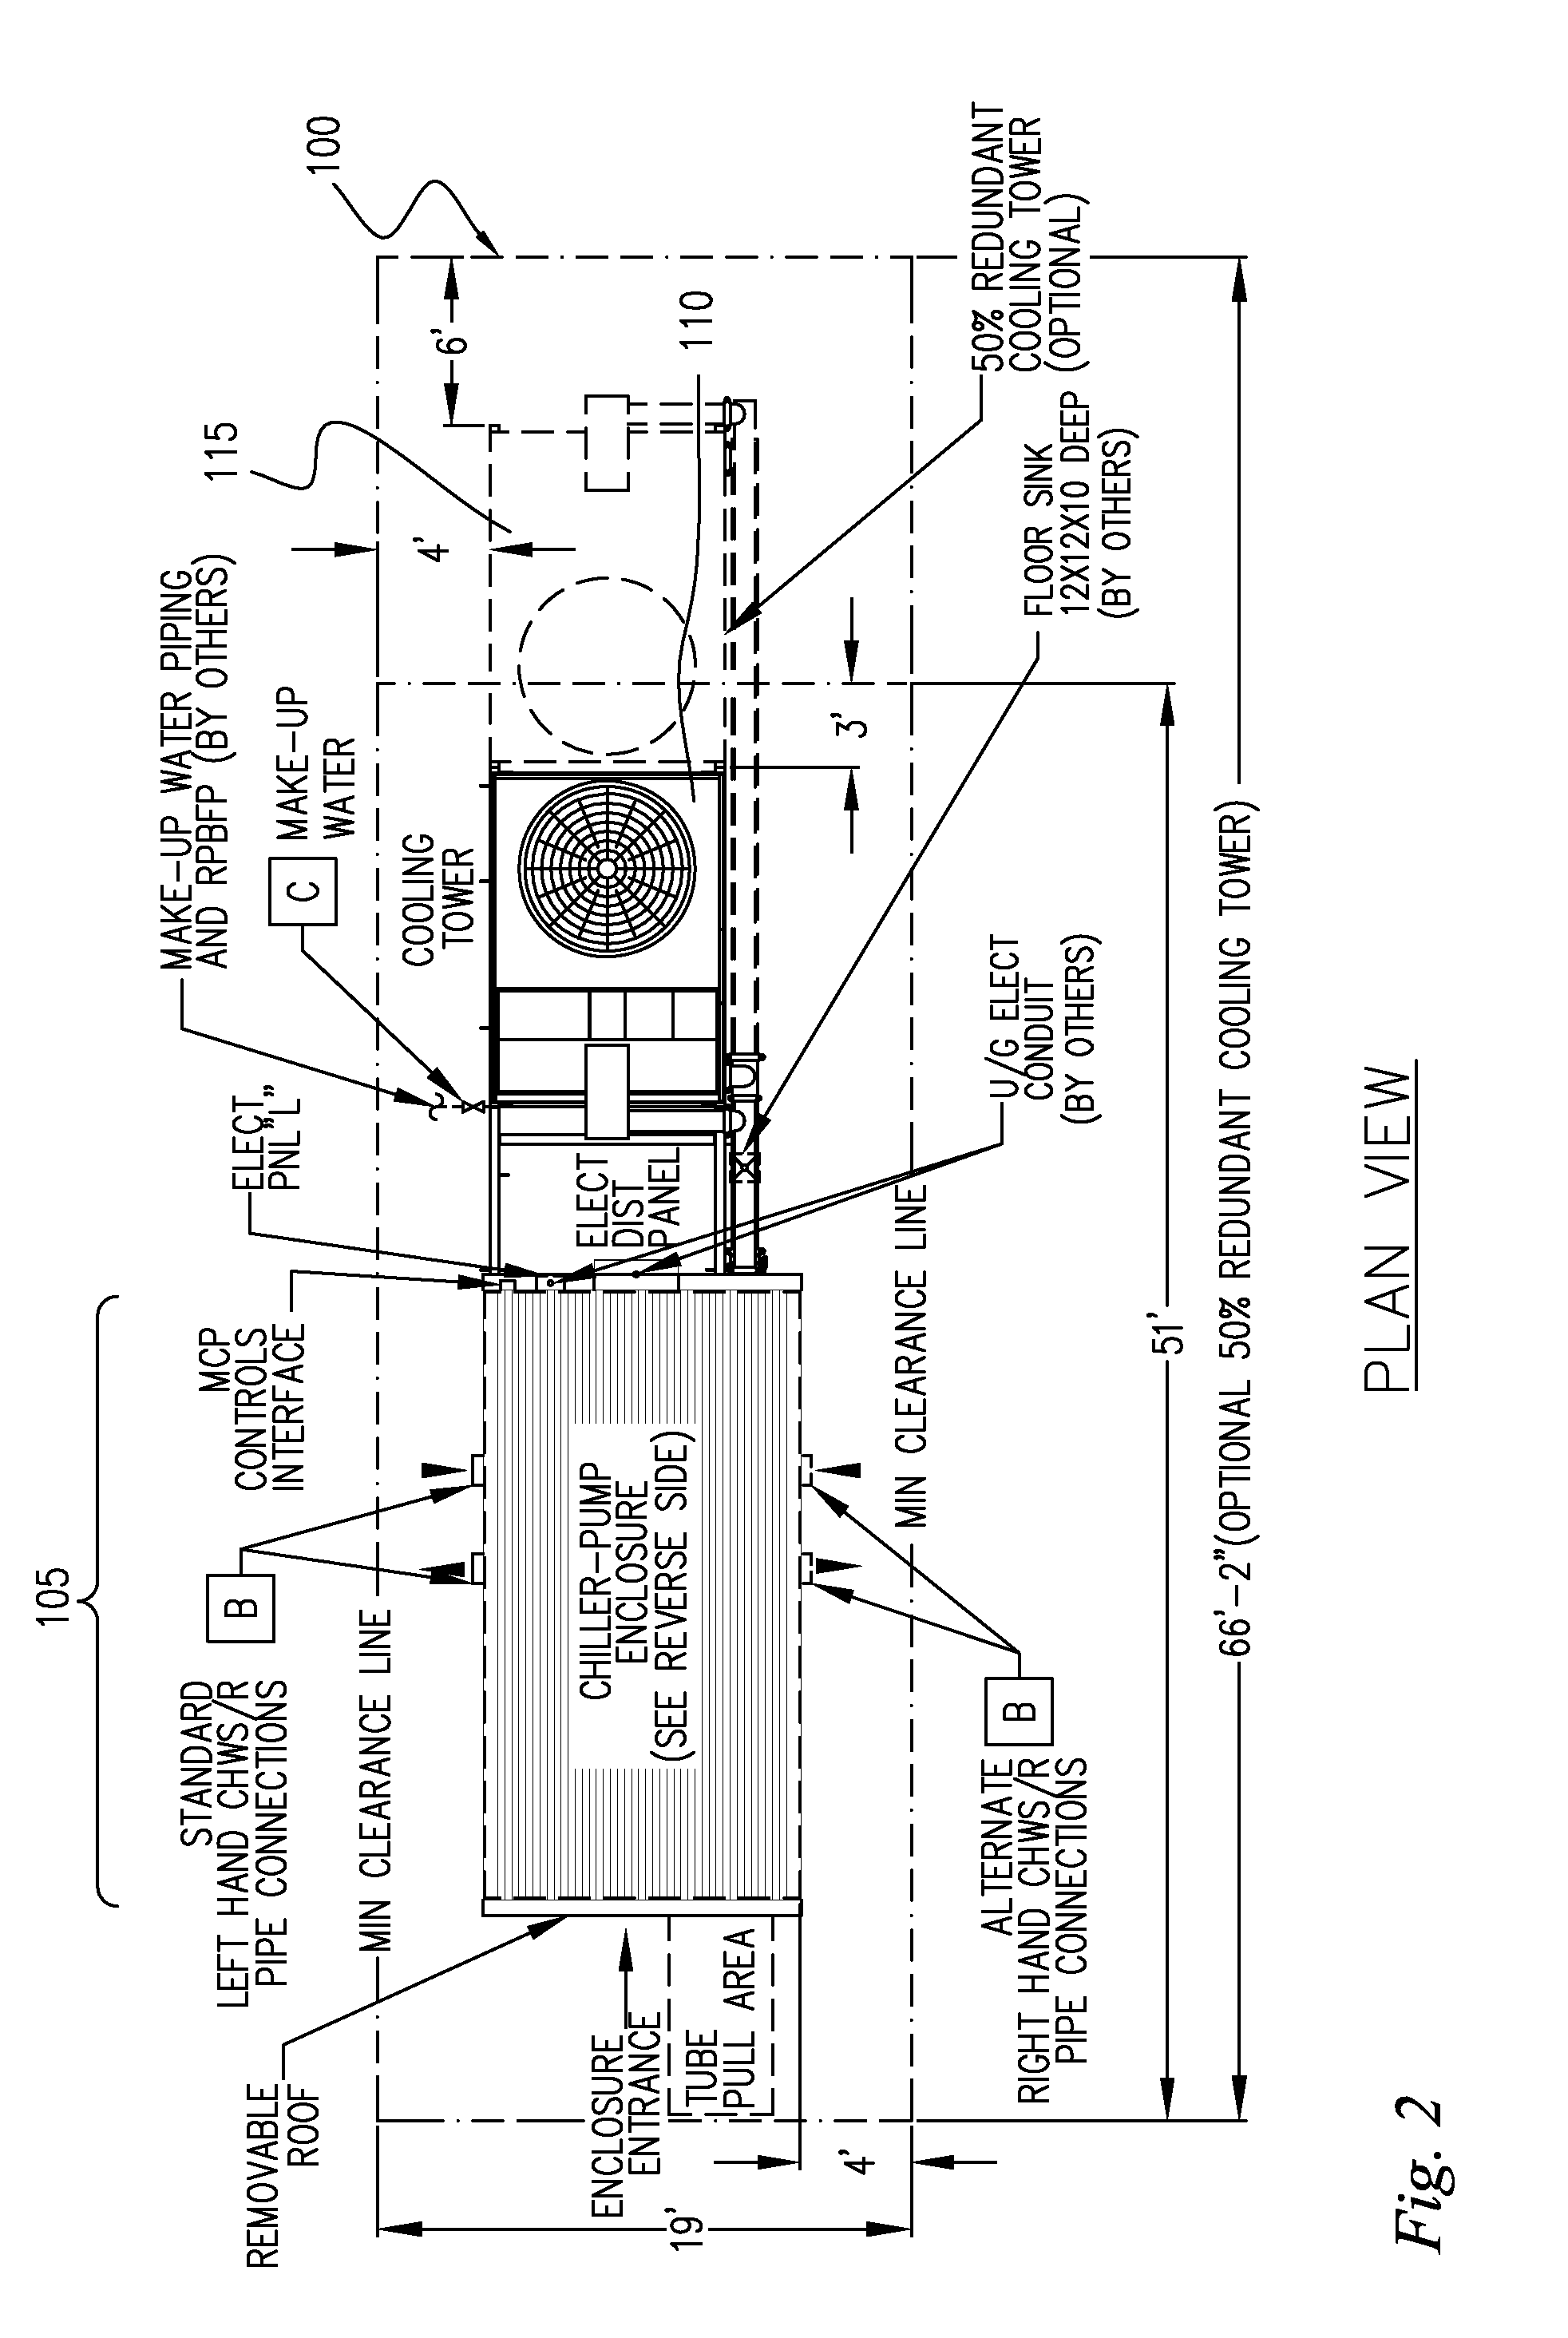 Method, System, and Apparatus for Modular Central Plant